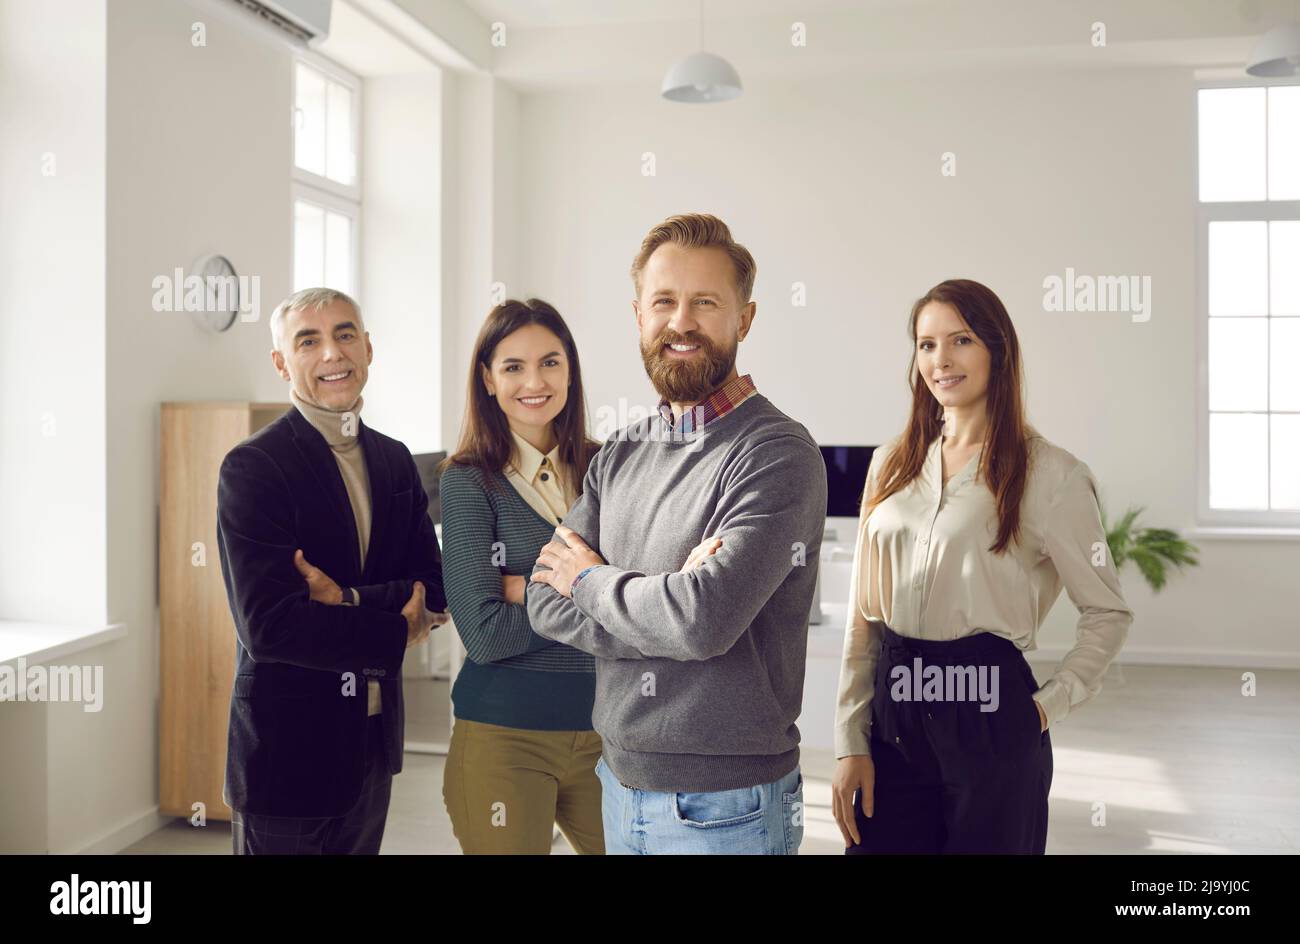 Smiling coworkers stand looking at camera creating team shots in office together. Stock Photo